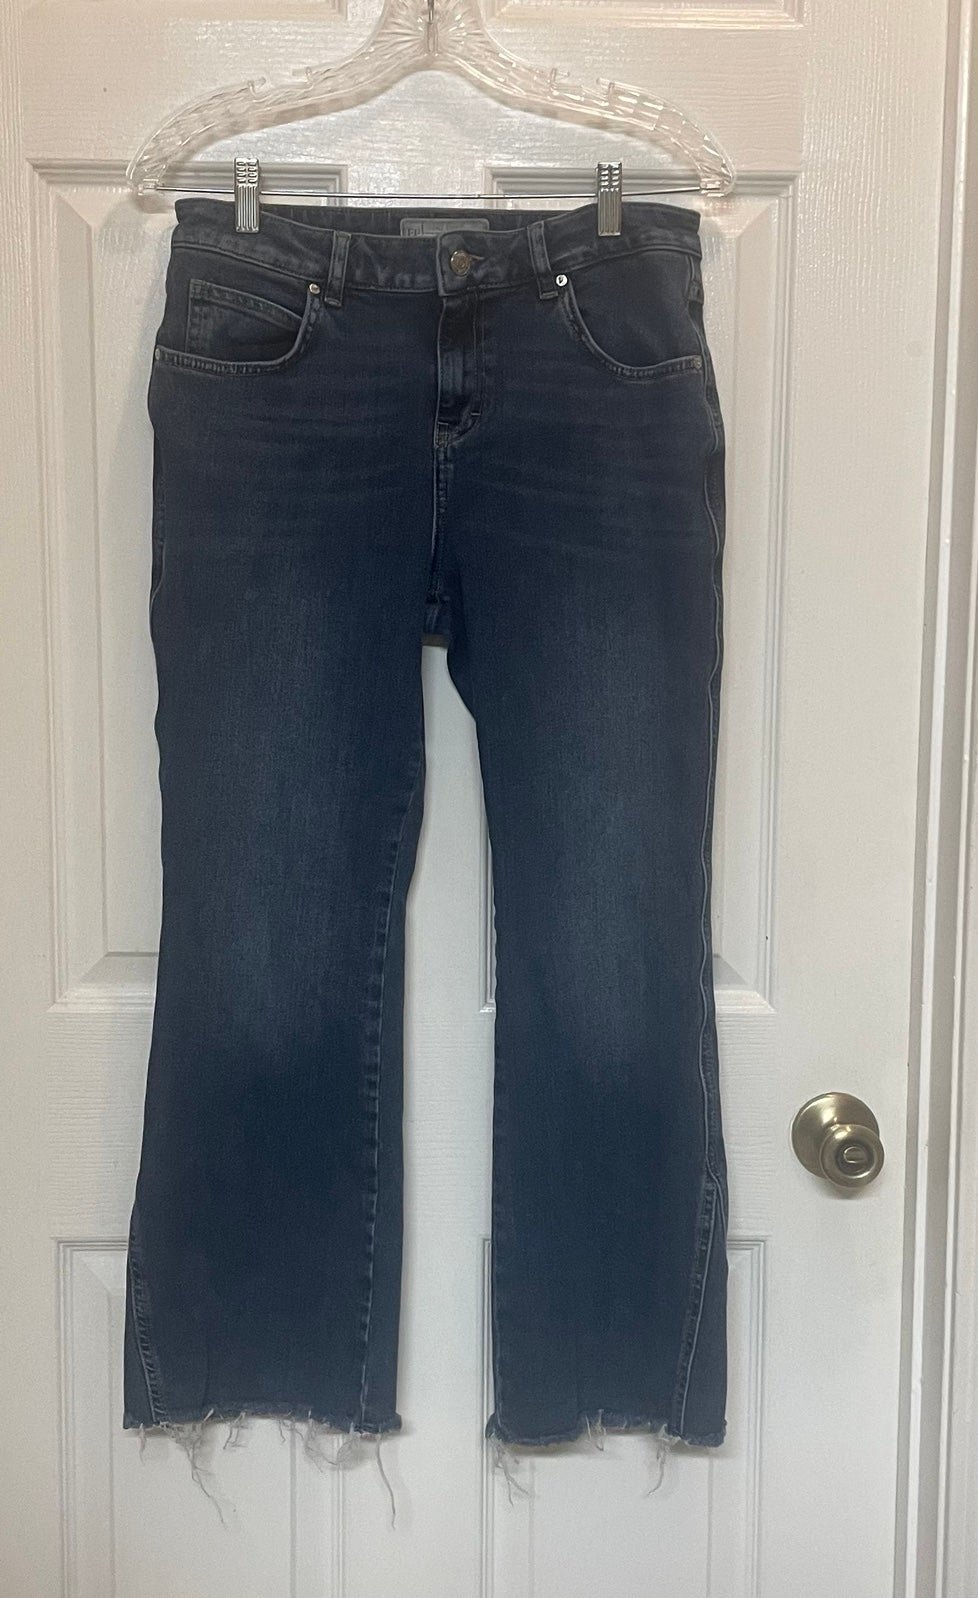 high discount Free People Jeans Flare Bell Bottom Raw Hem Ankle Size 30 J8dBxsugH Discount